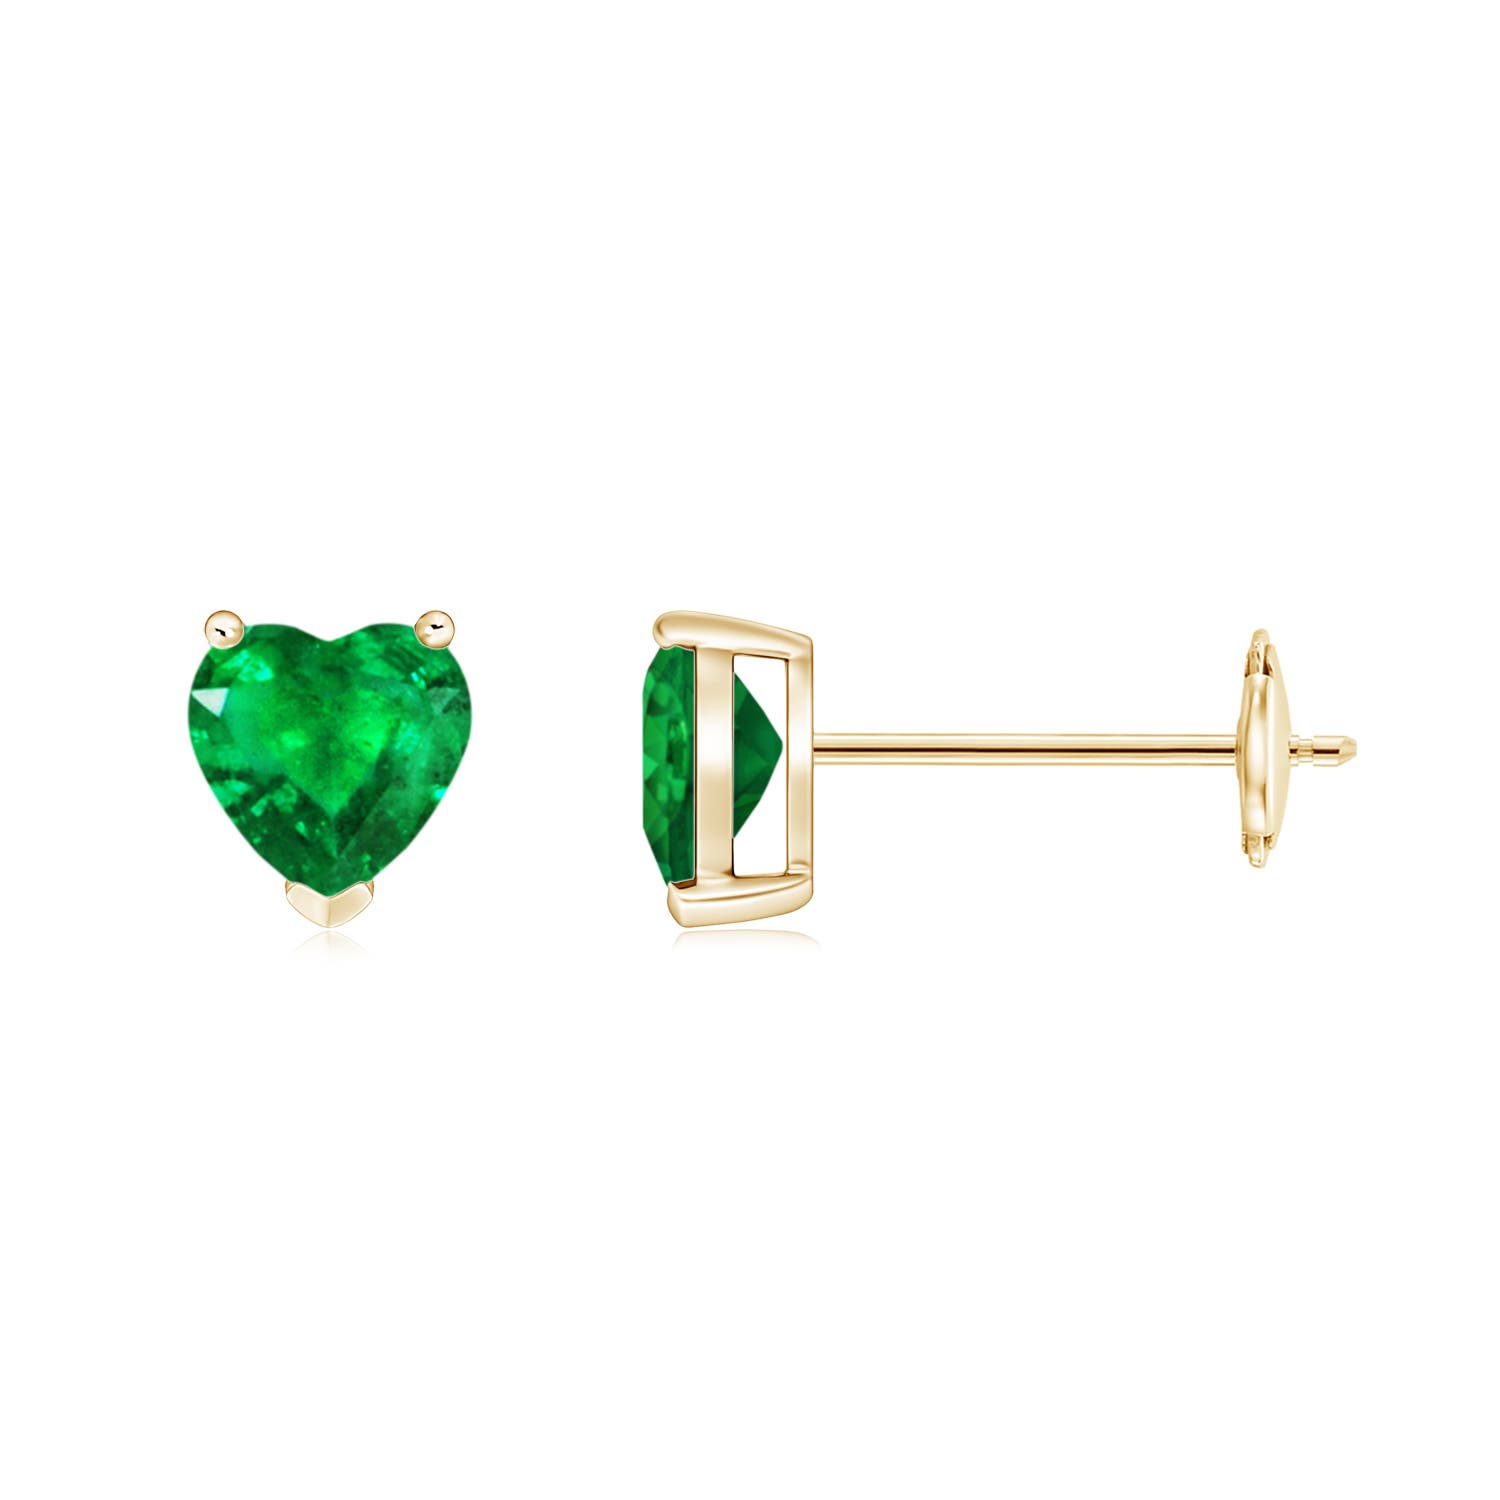 Emerald Heart Stud Earrings and Necklace Set, Gold Plated Tiny Heart Studs,  Green Mini Heart Stud Earrings, Turquoise Stud Earrings - Etsy